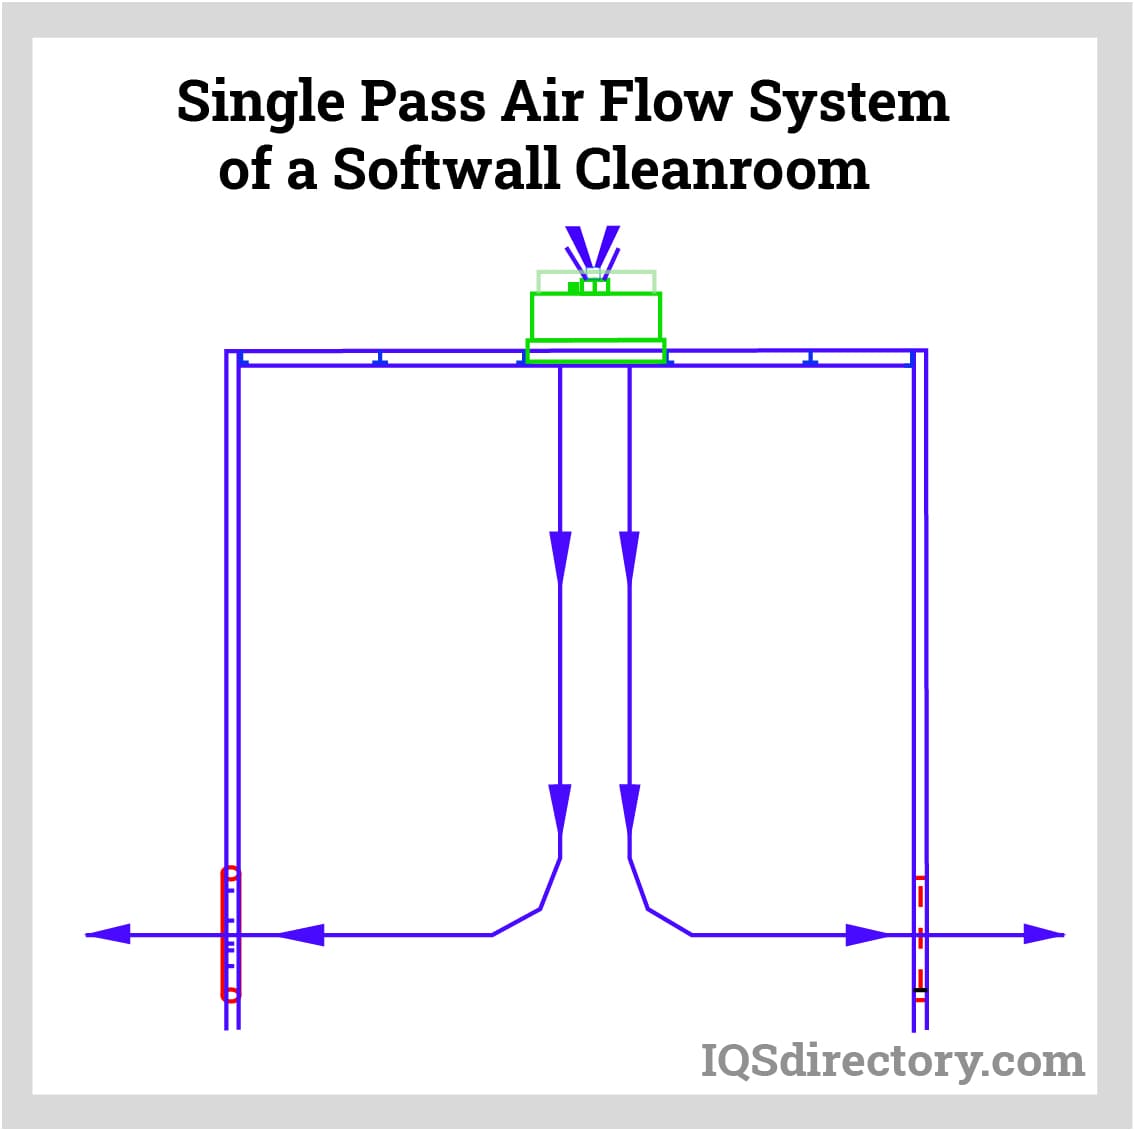 Single Pass Air Flow System of a Softwall Cleanroom